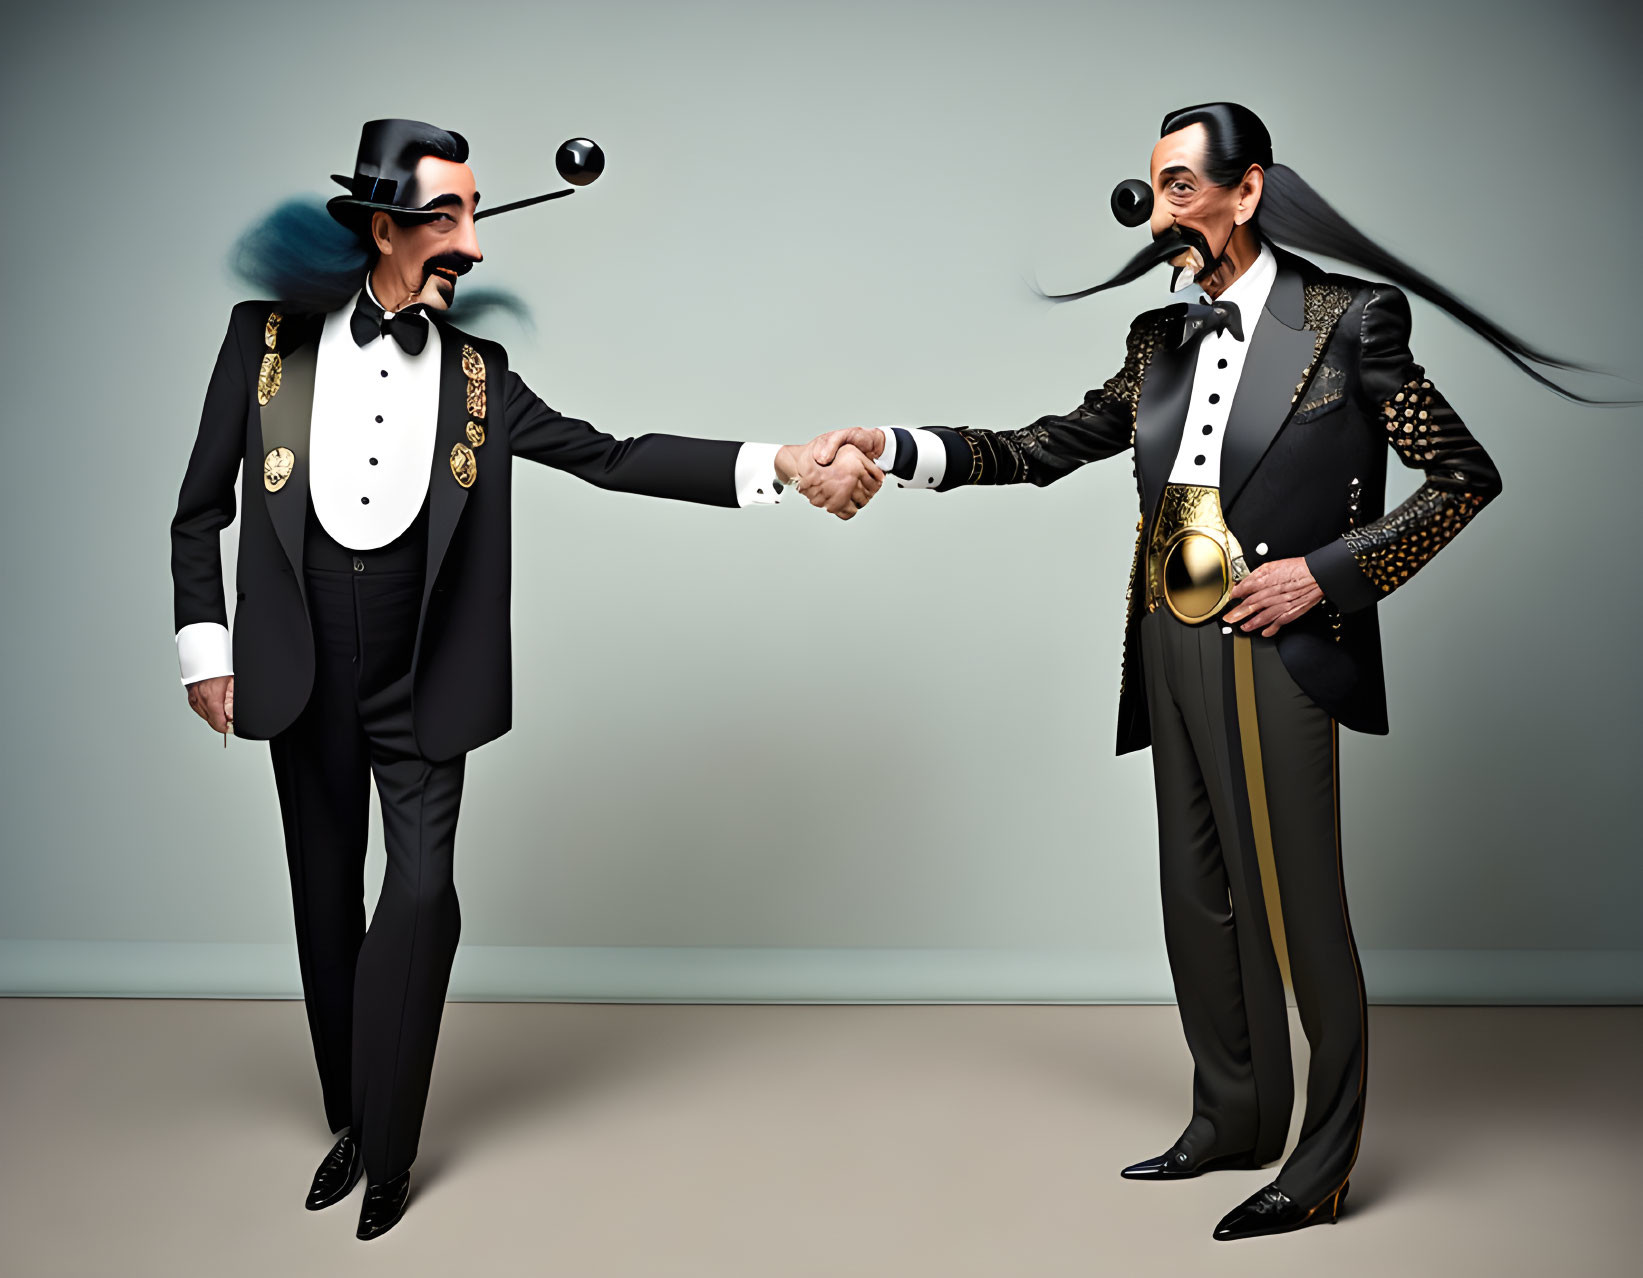 Exaggerated men in formal attire shaking hands